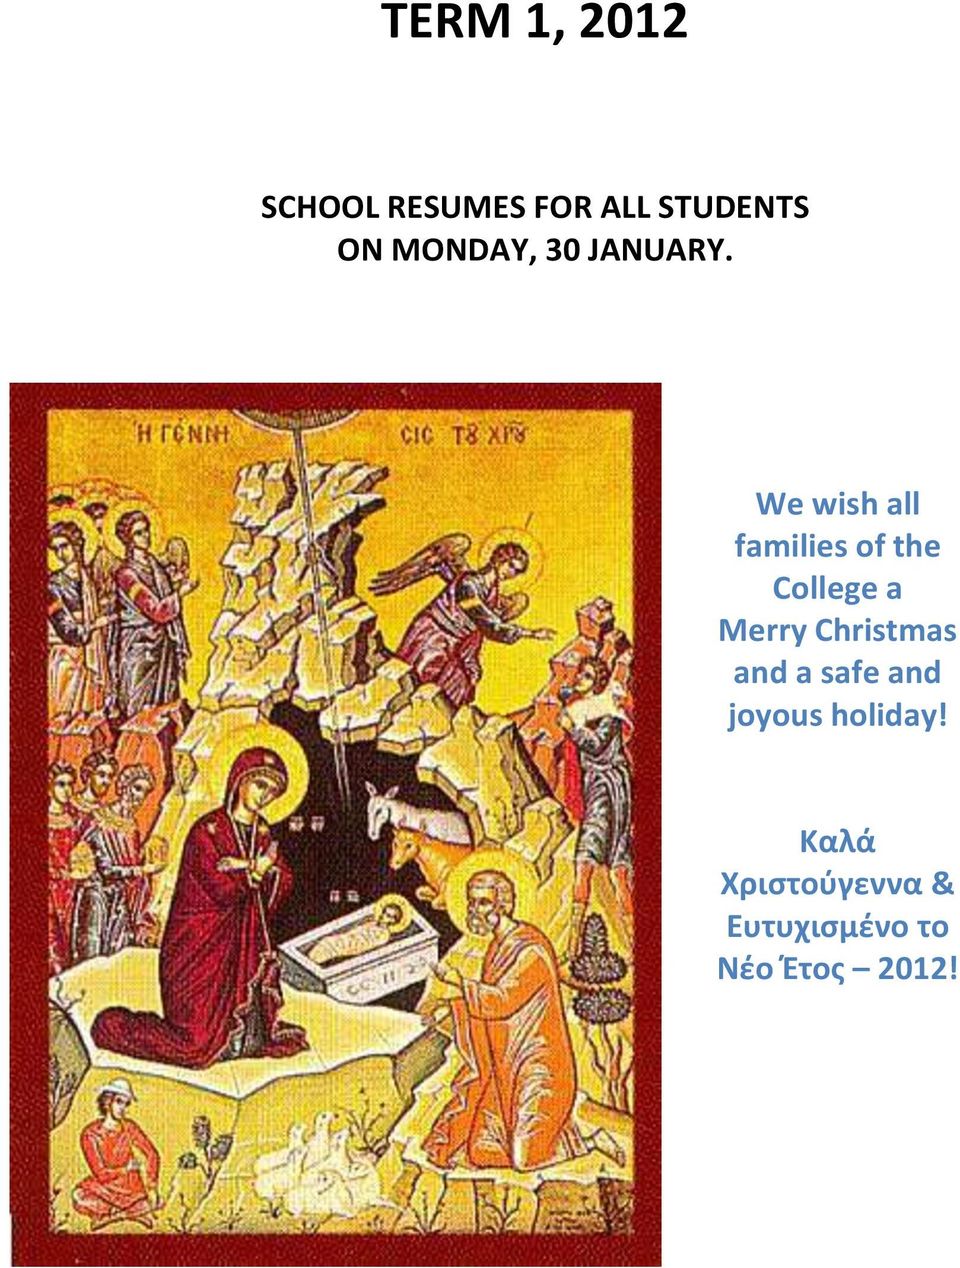 We wish all families of the College a Merry